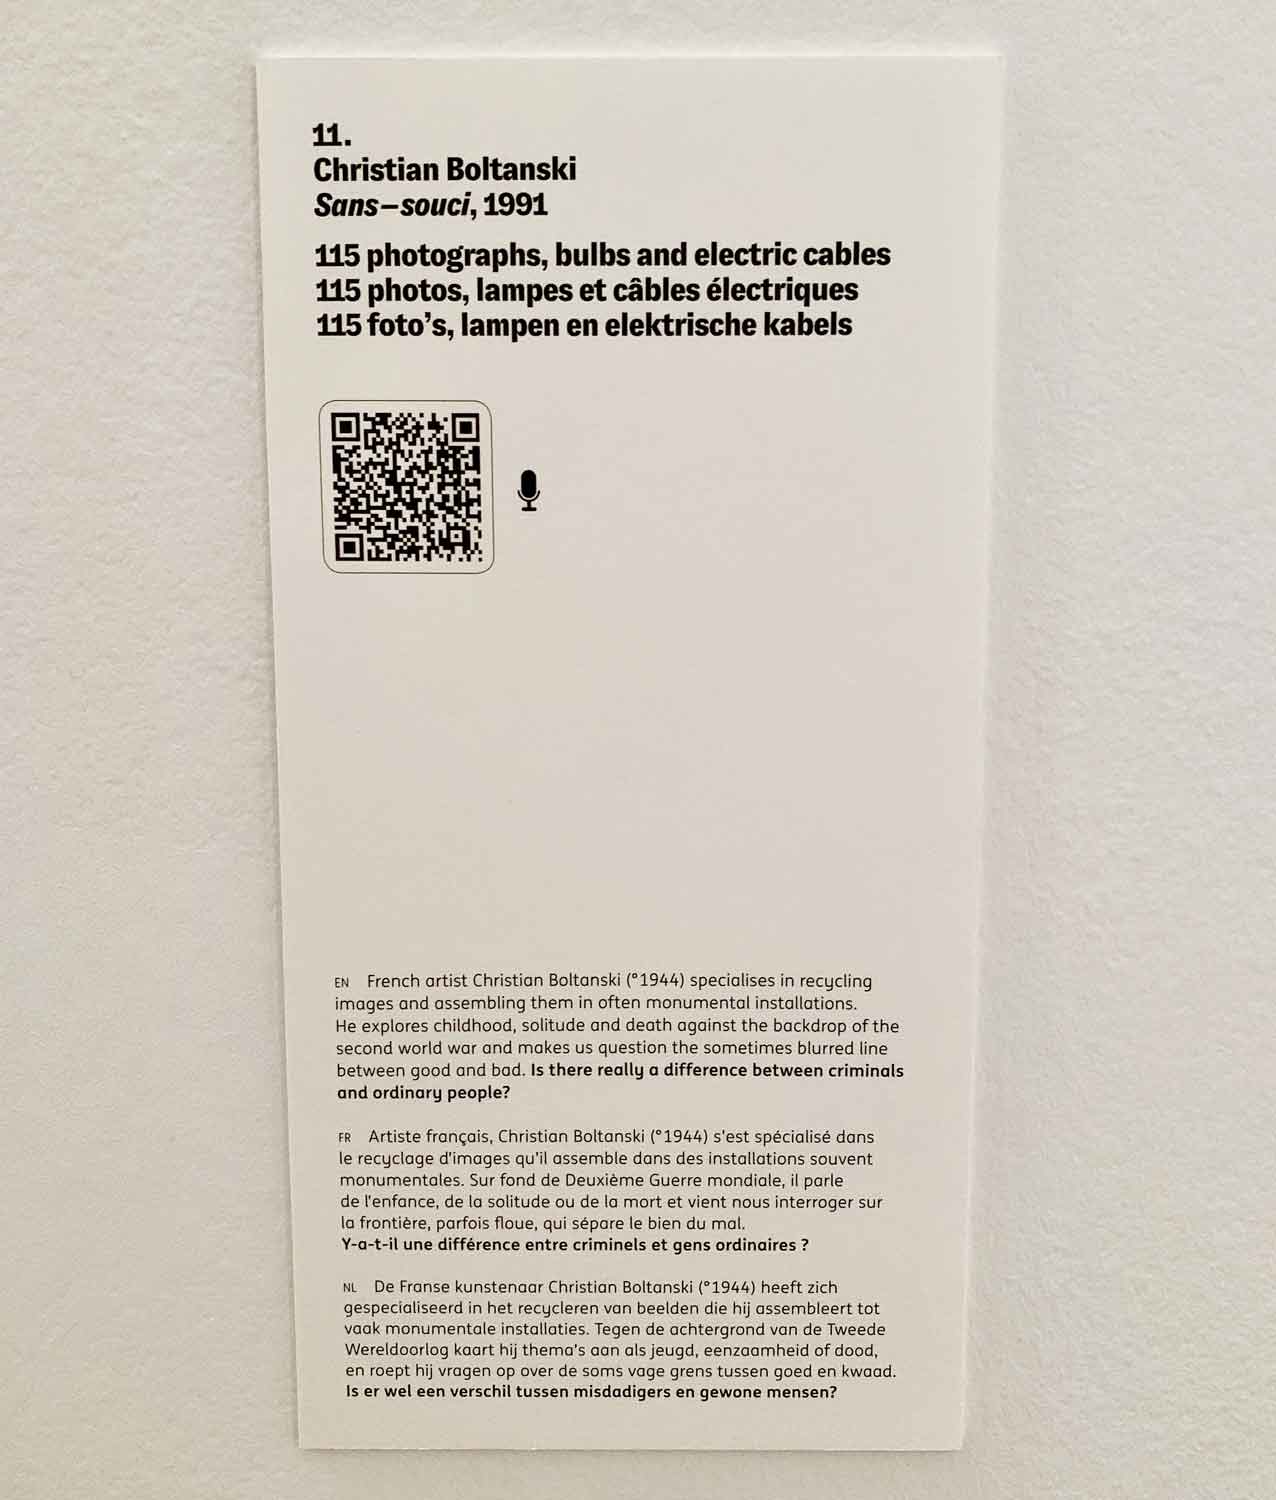 An exhibit label for the work of Christian Boltanski. The question at the bottom of the text is repeated in the audio guide.